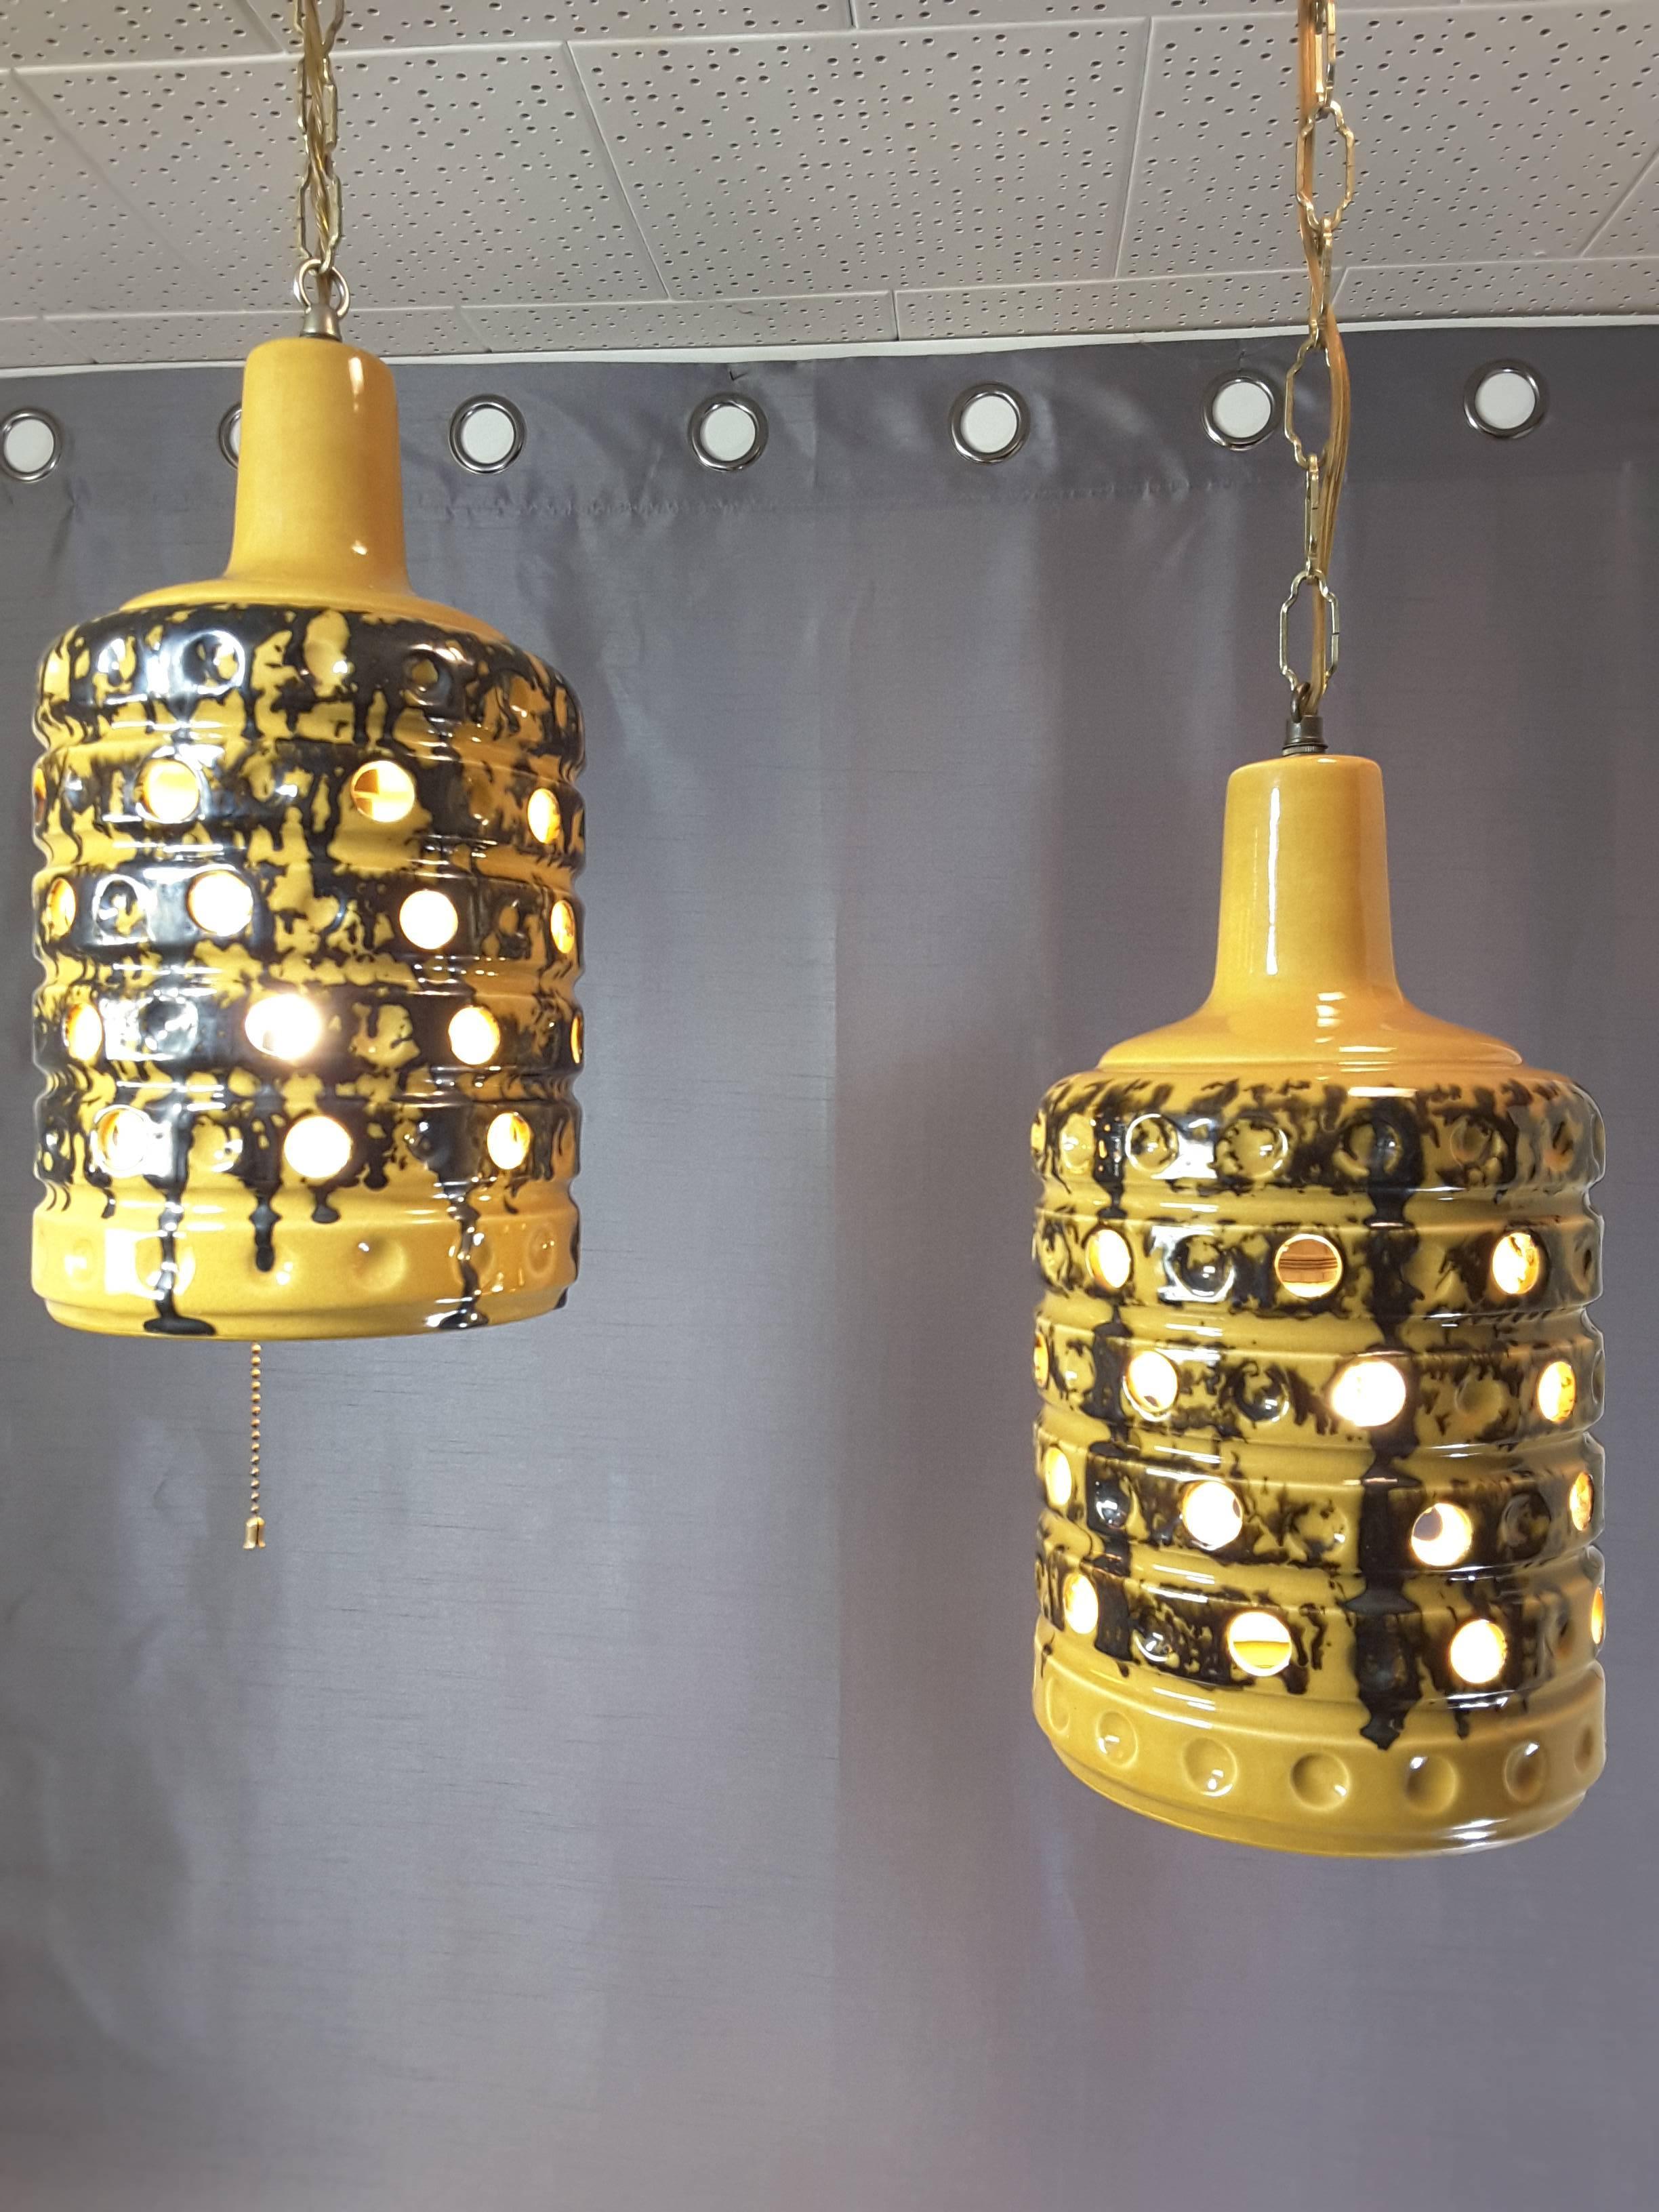 A pair of Mid-Century ceramic swag pendant lights, circa 1960's, done in deep mustard yellow with an earth tone dark brown sponge and drip accent. The lamps are open on the bottom and have off set holes on the sides for light. The top is a raised